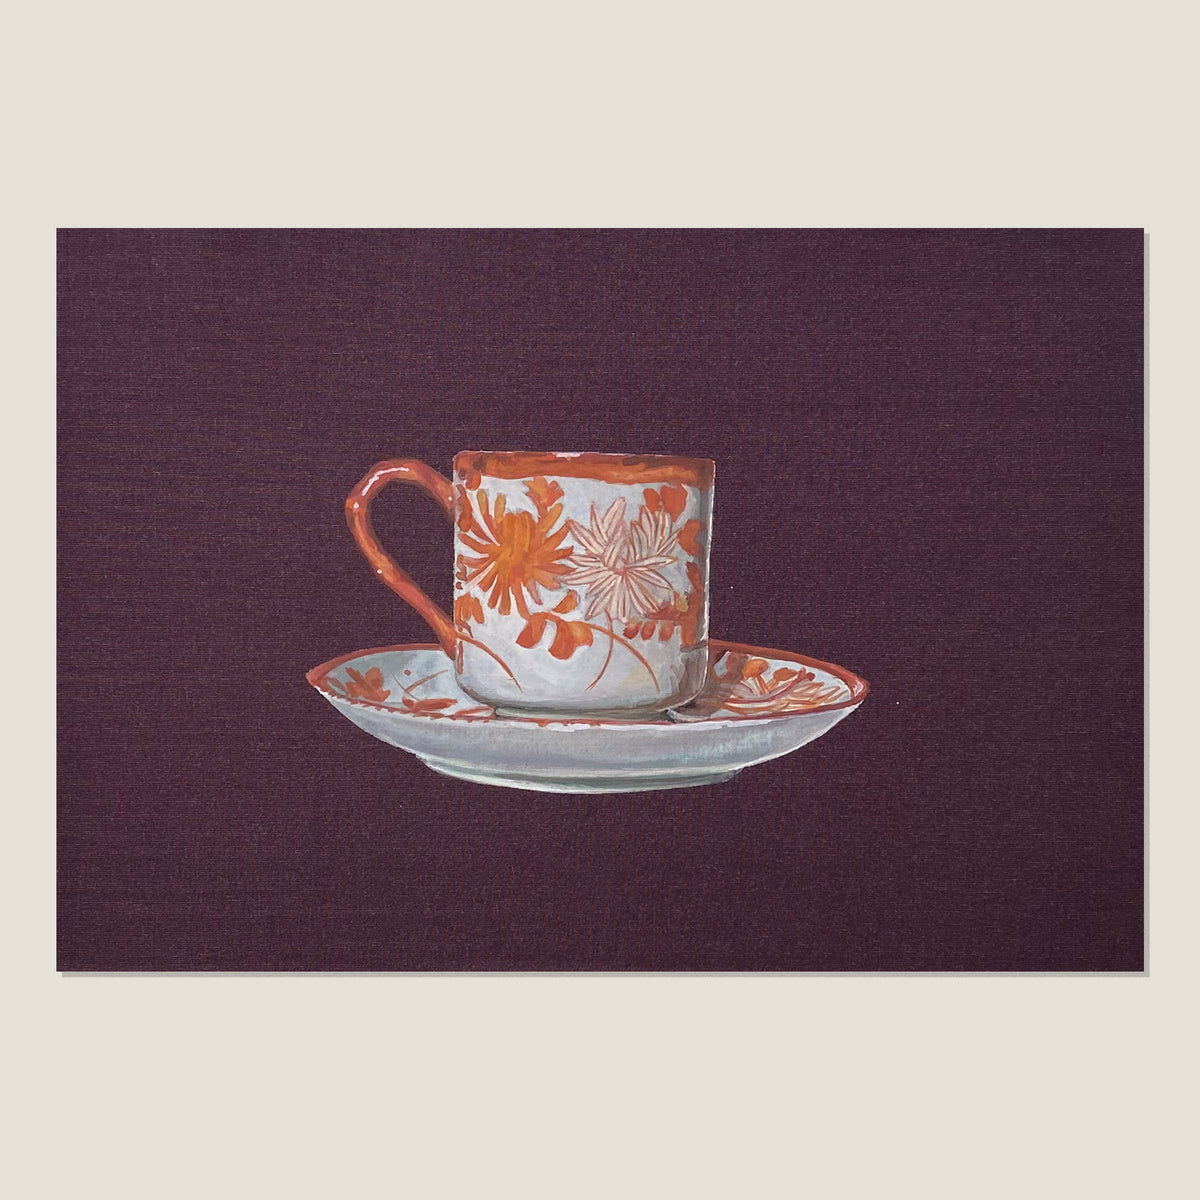 Japanese Hard Paste Teacup and Saucer I, 1905